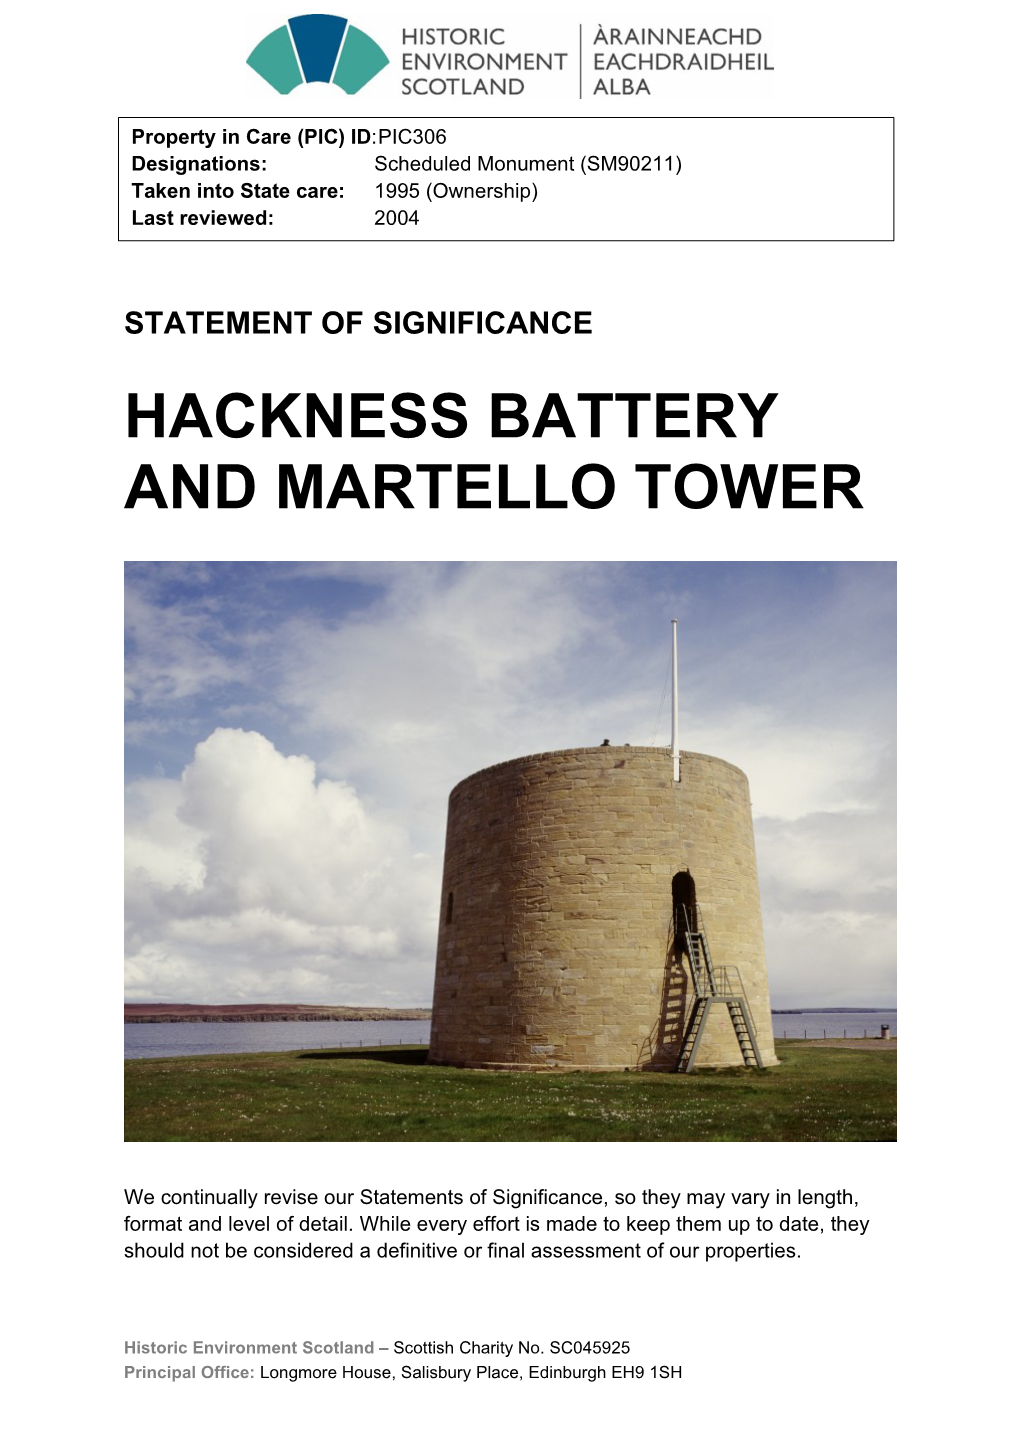 Hackness Battery and Martello Tower Statement of Significance